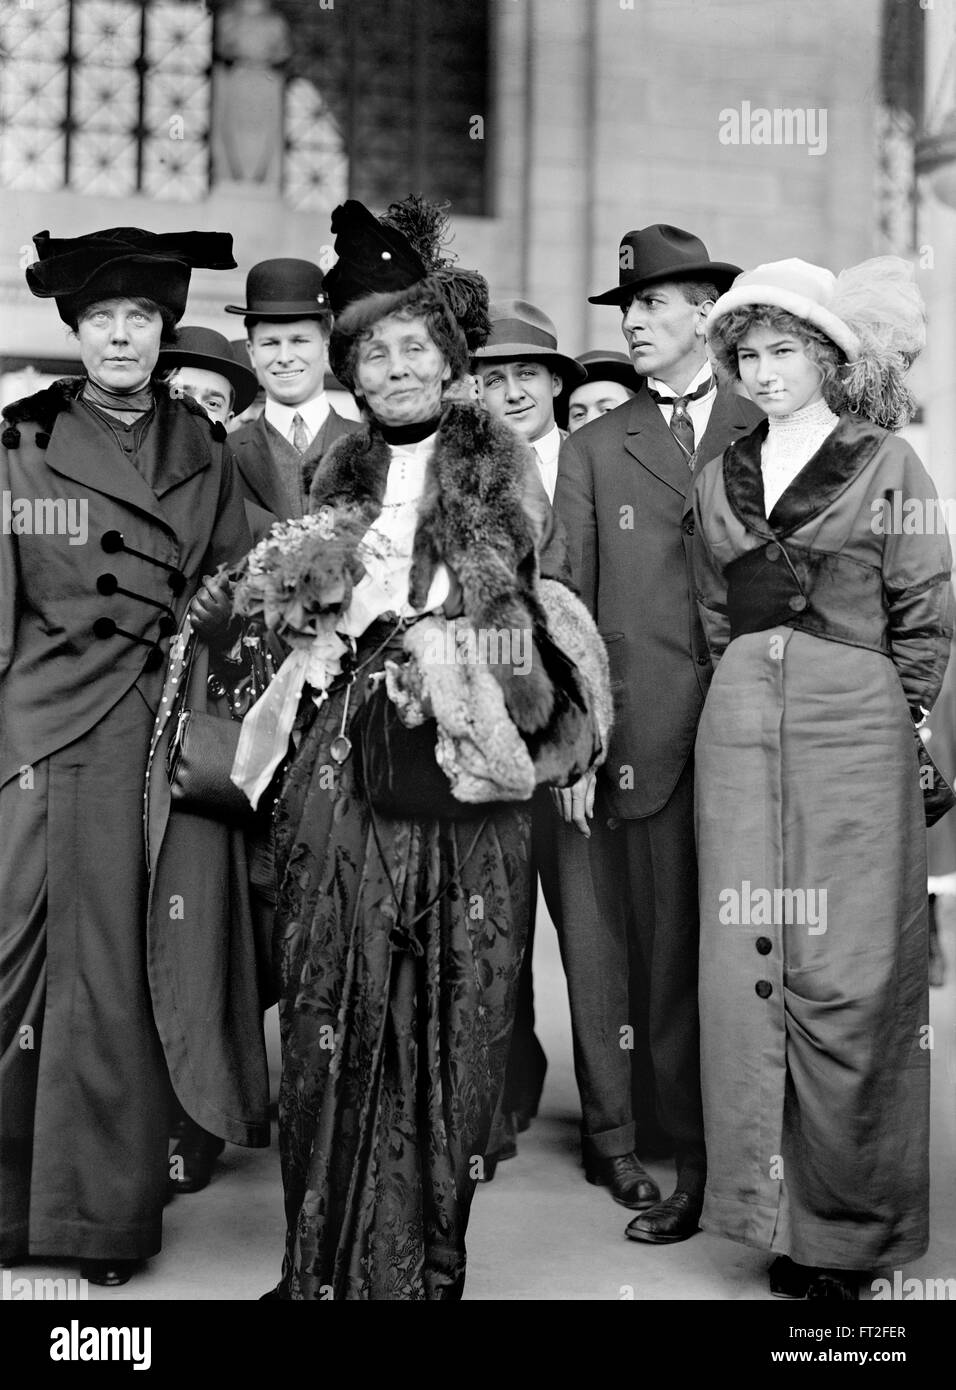 Mrs Emmeline Pankhurst (centre), leader of the British suffragette movement, with the American women's rights activist, Lucy Burns, to her right. Photo c.1913 Stock Photo